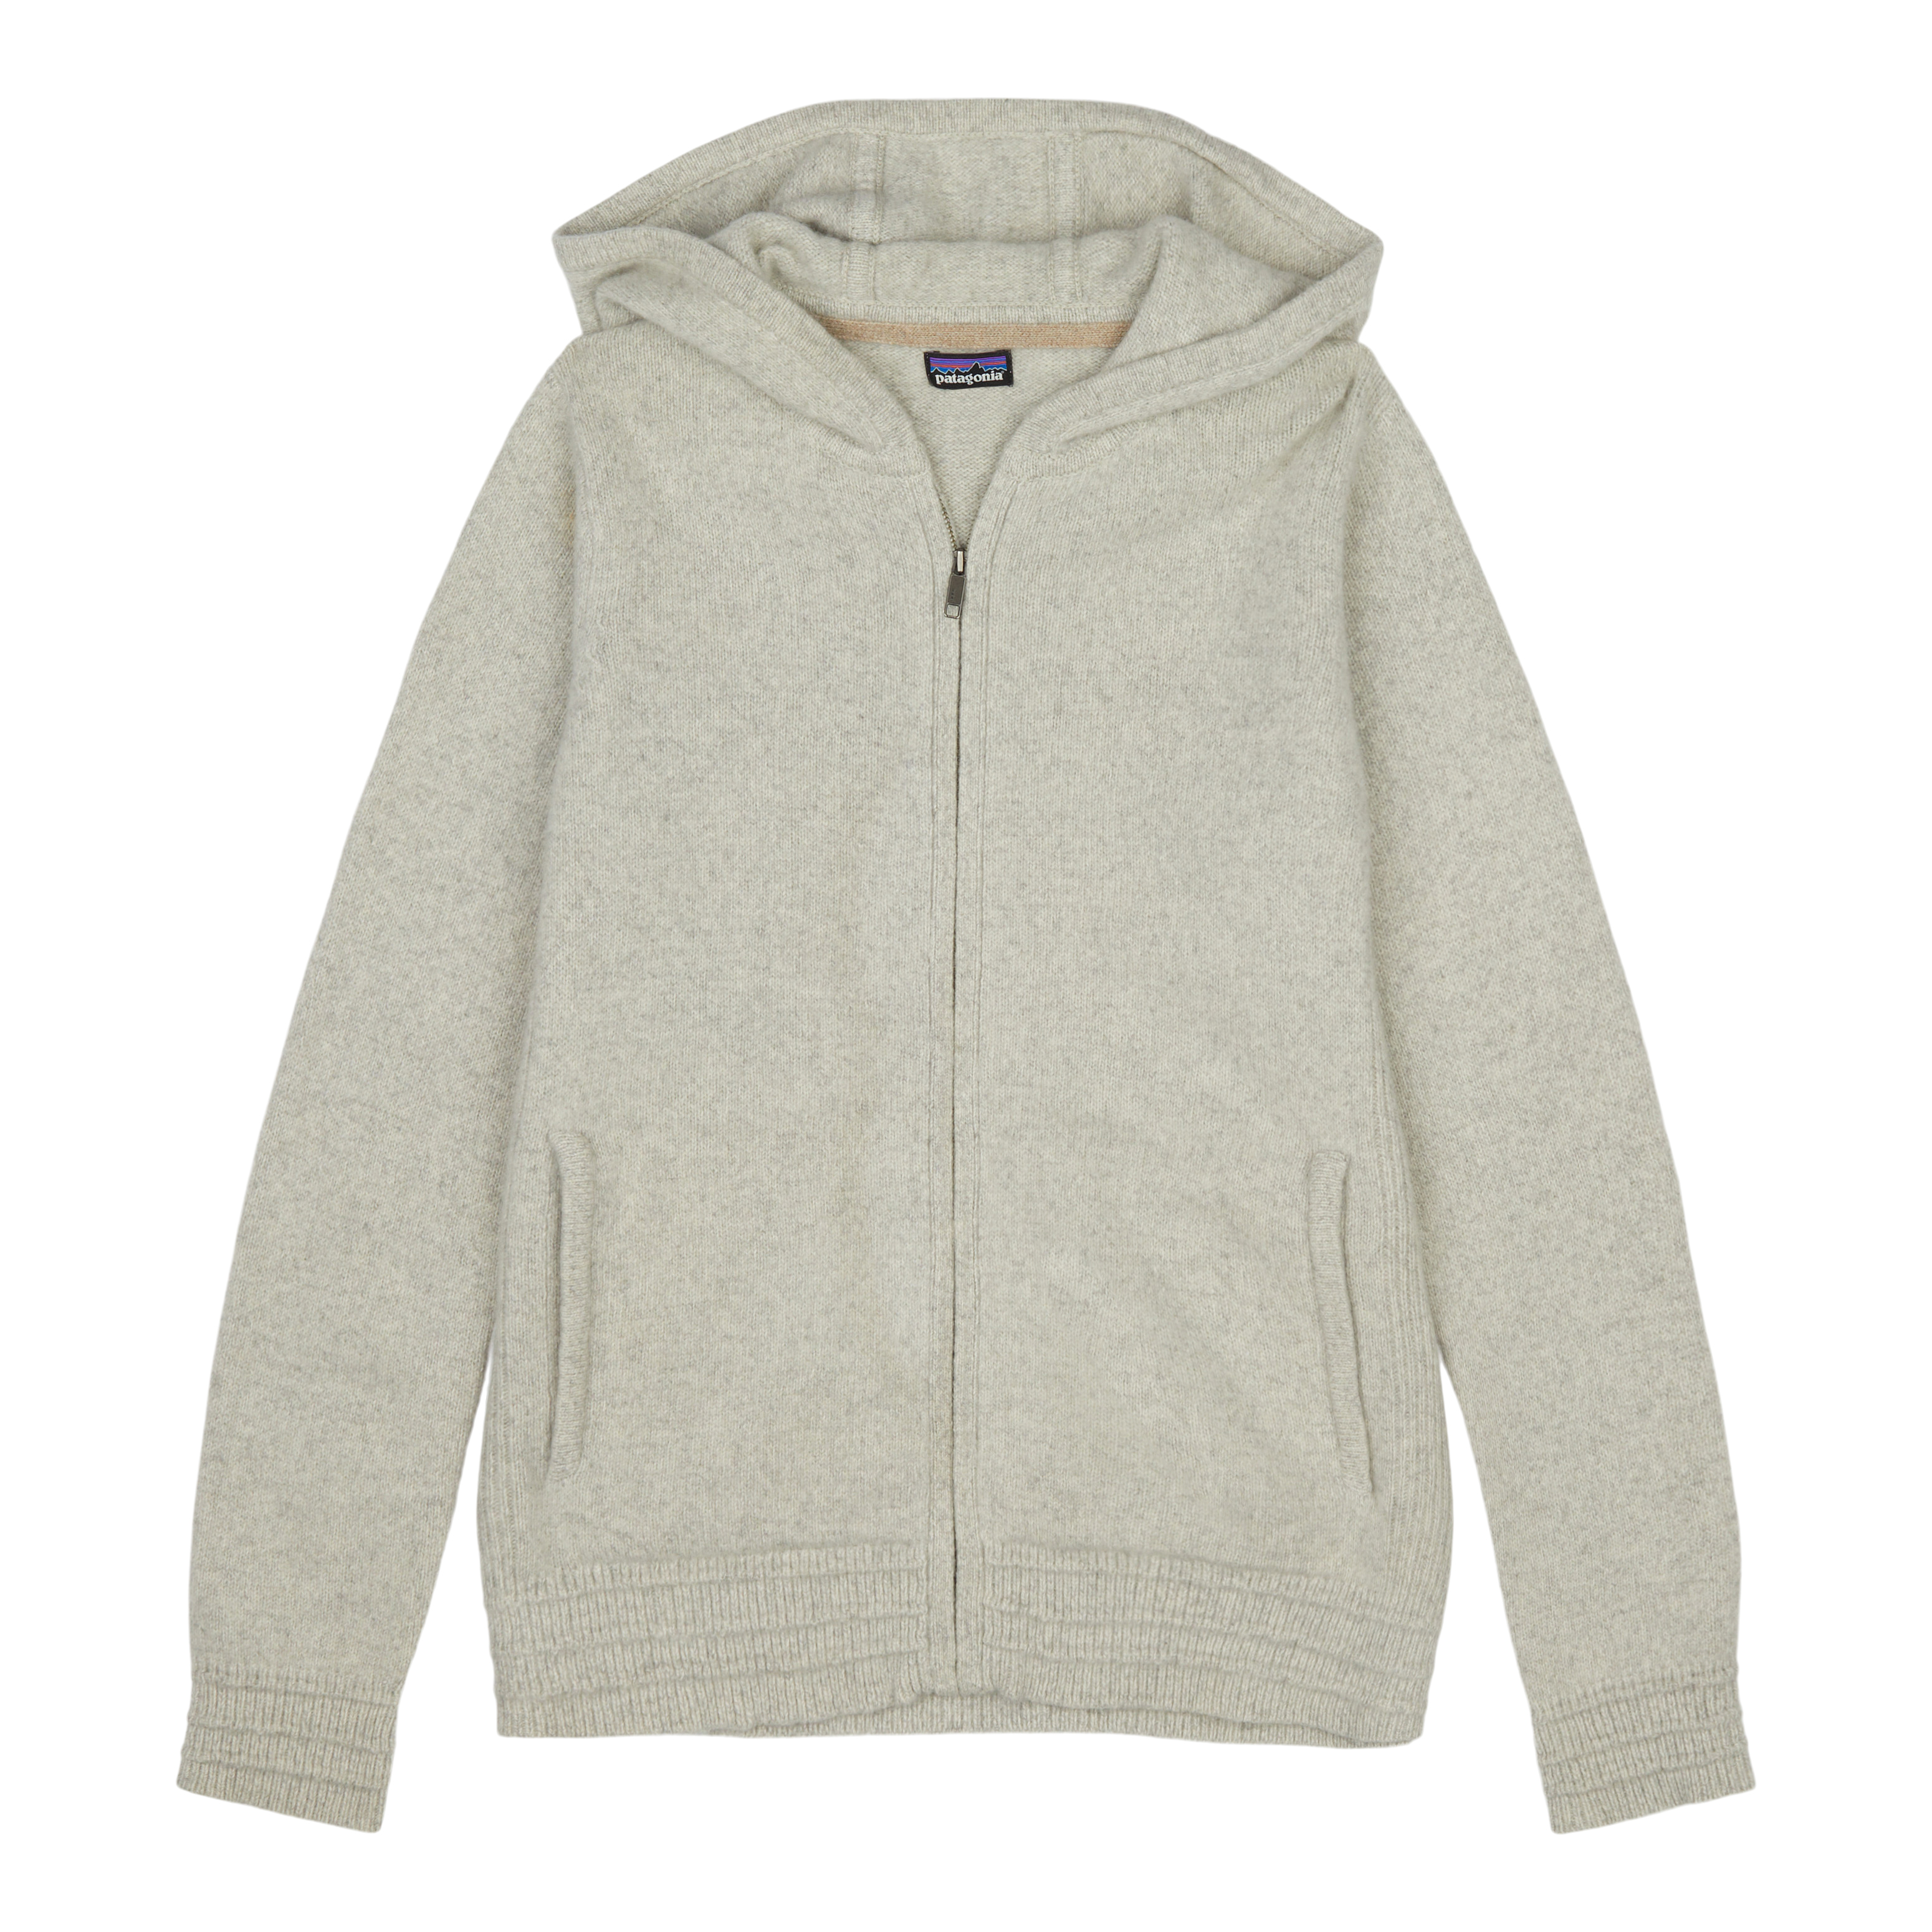 Worn Wear Women's Recycled Cashmere Hoody Black - Used